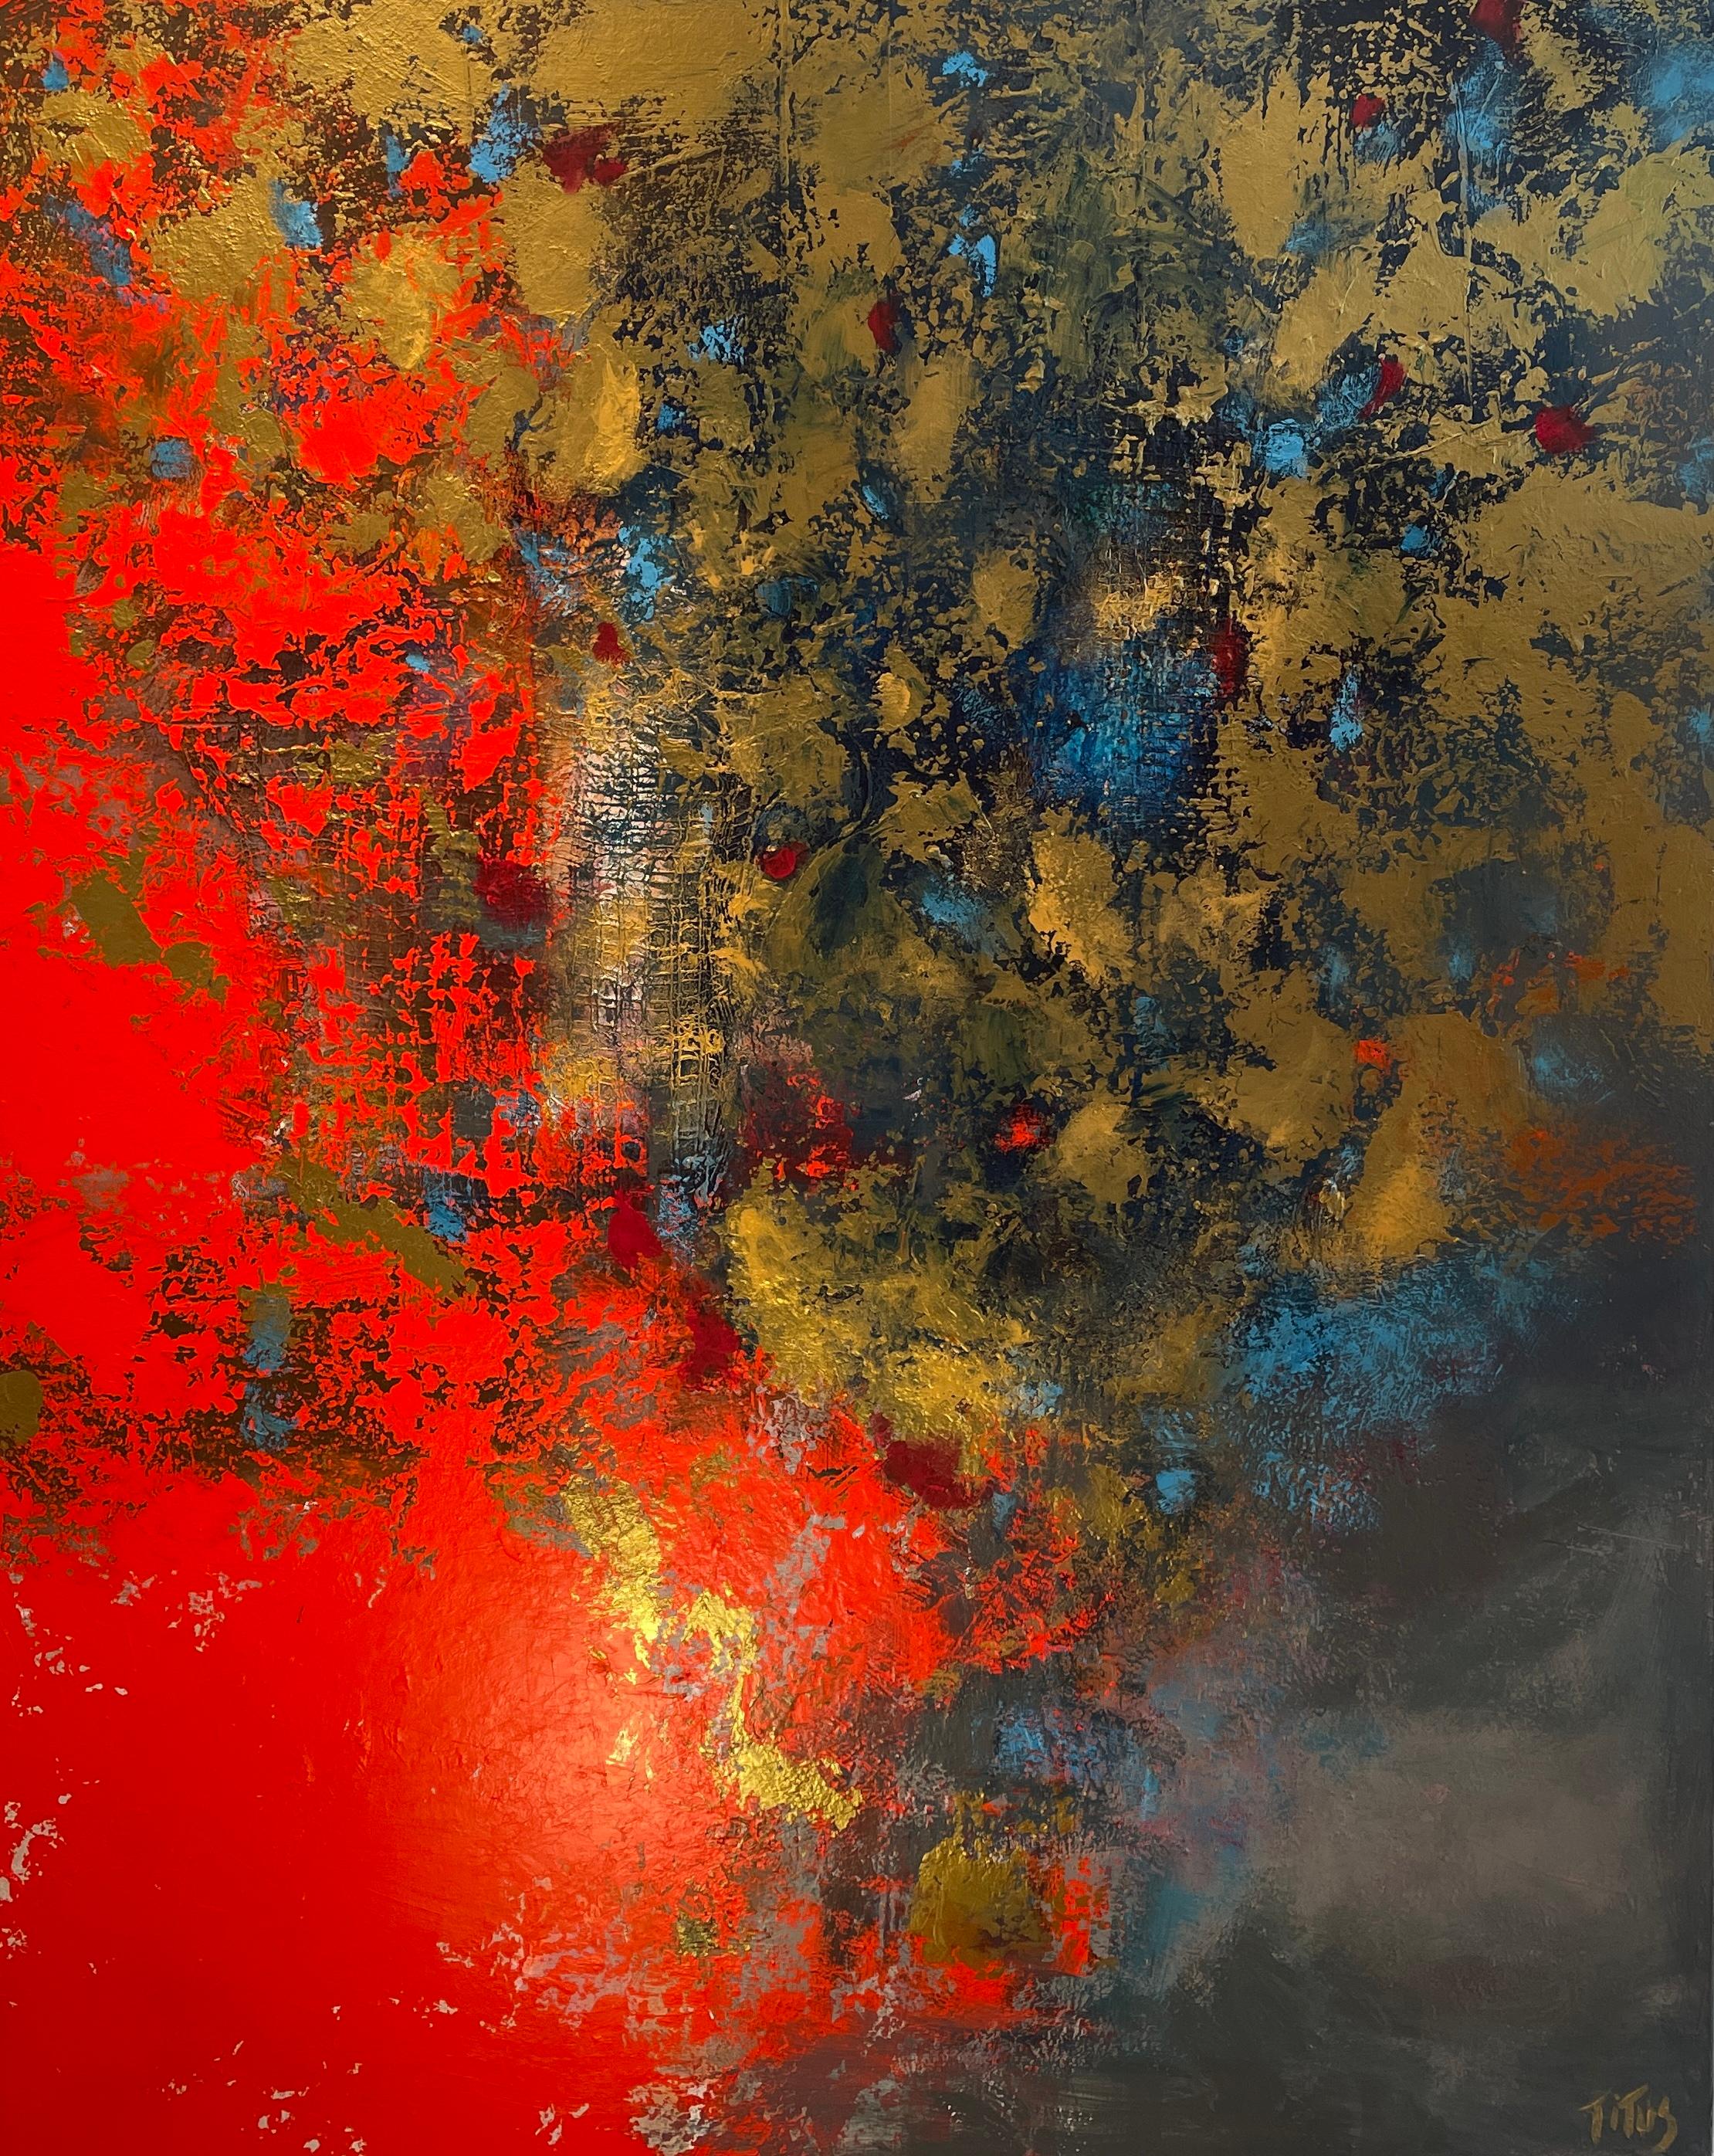 The painting "Consciousness" by Mary Titus is a vivid portrayal of emotional intensity through abstract expressionism. The canvas is dominated by a fiery red that seems to blaze upwards, evoking a sense of passion and dynamism. Against this, the